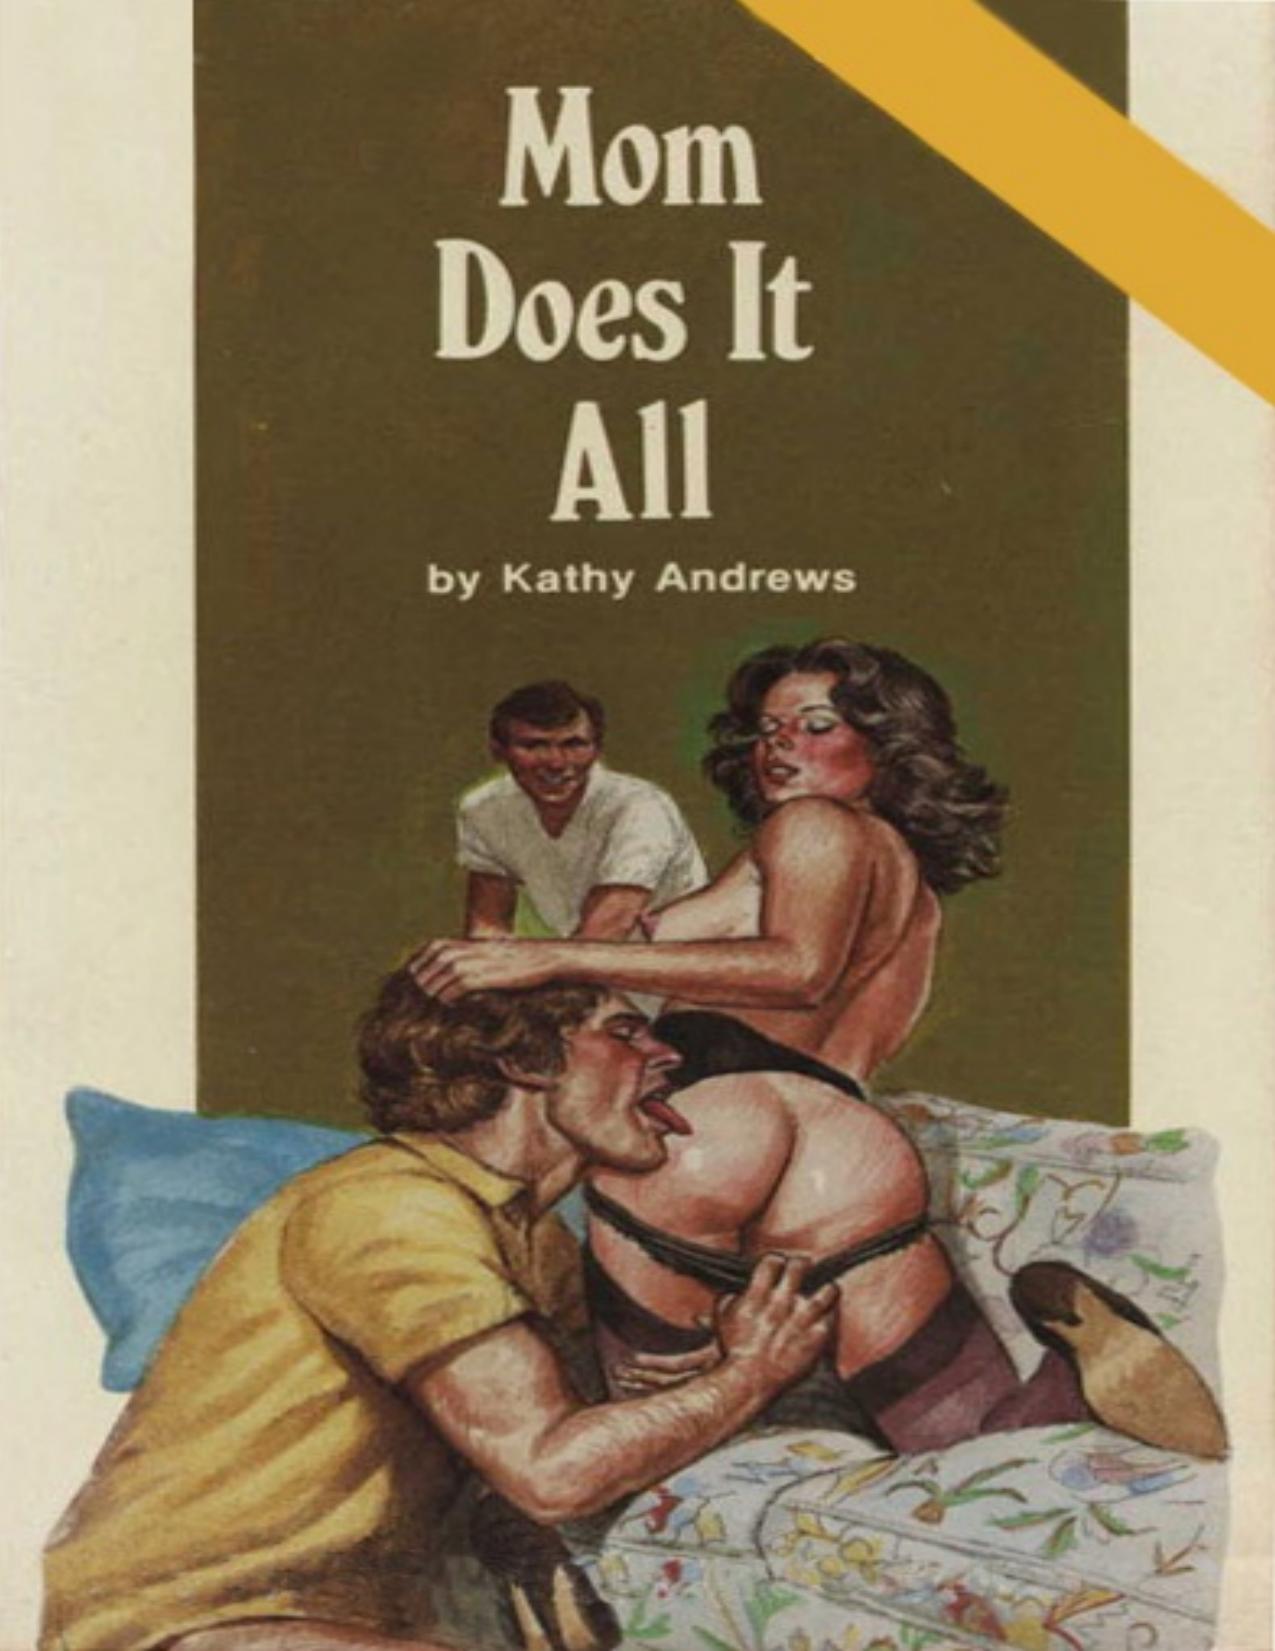 Mom Does It All by Kathy Andrews